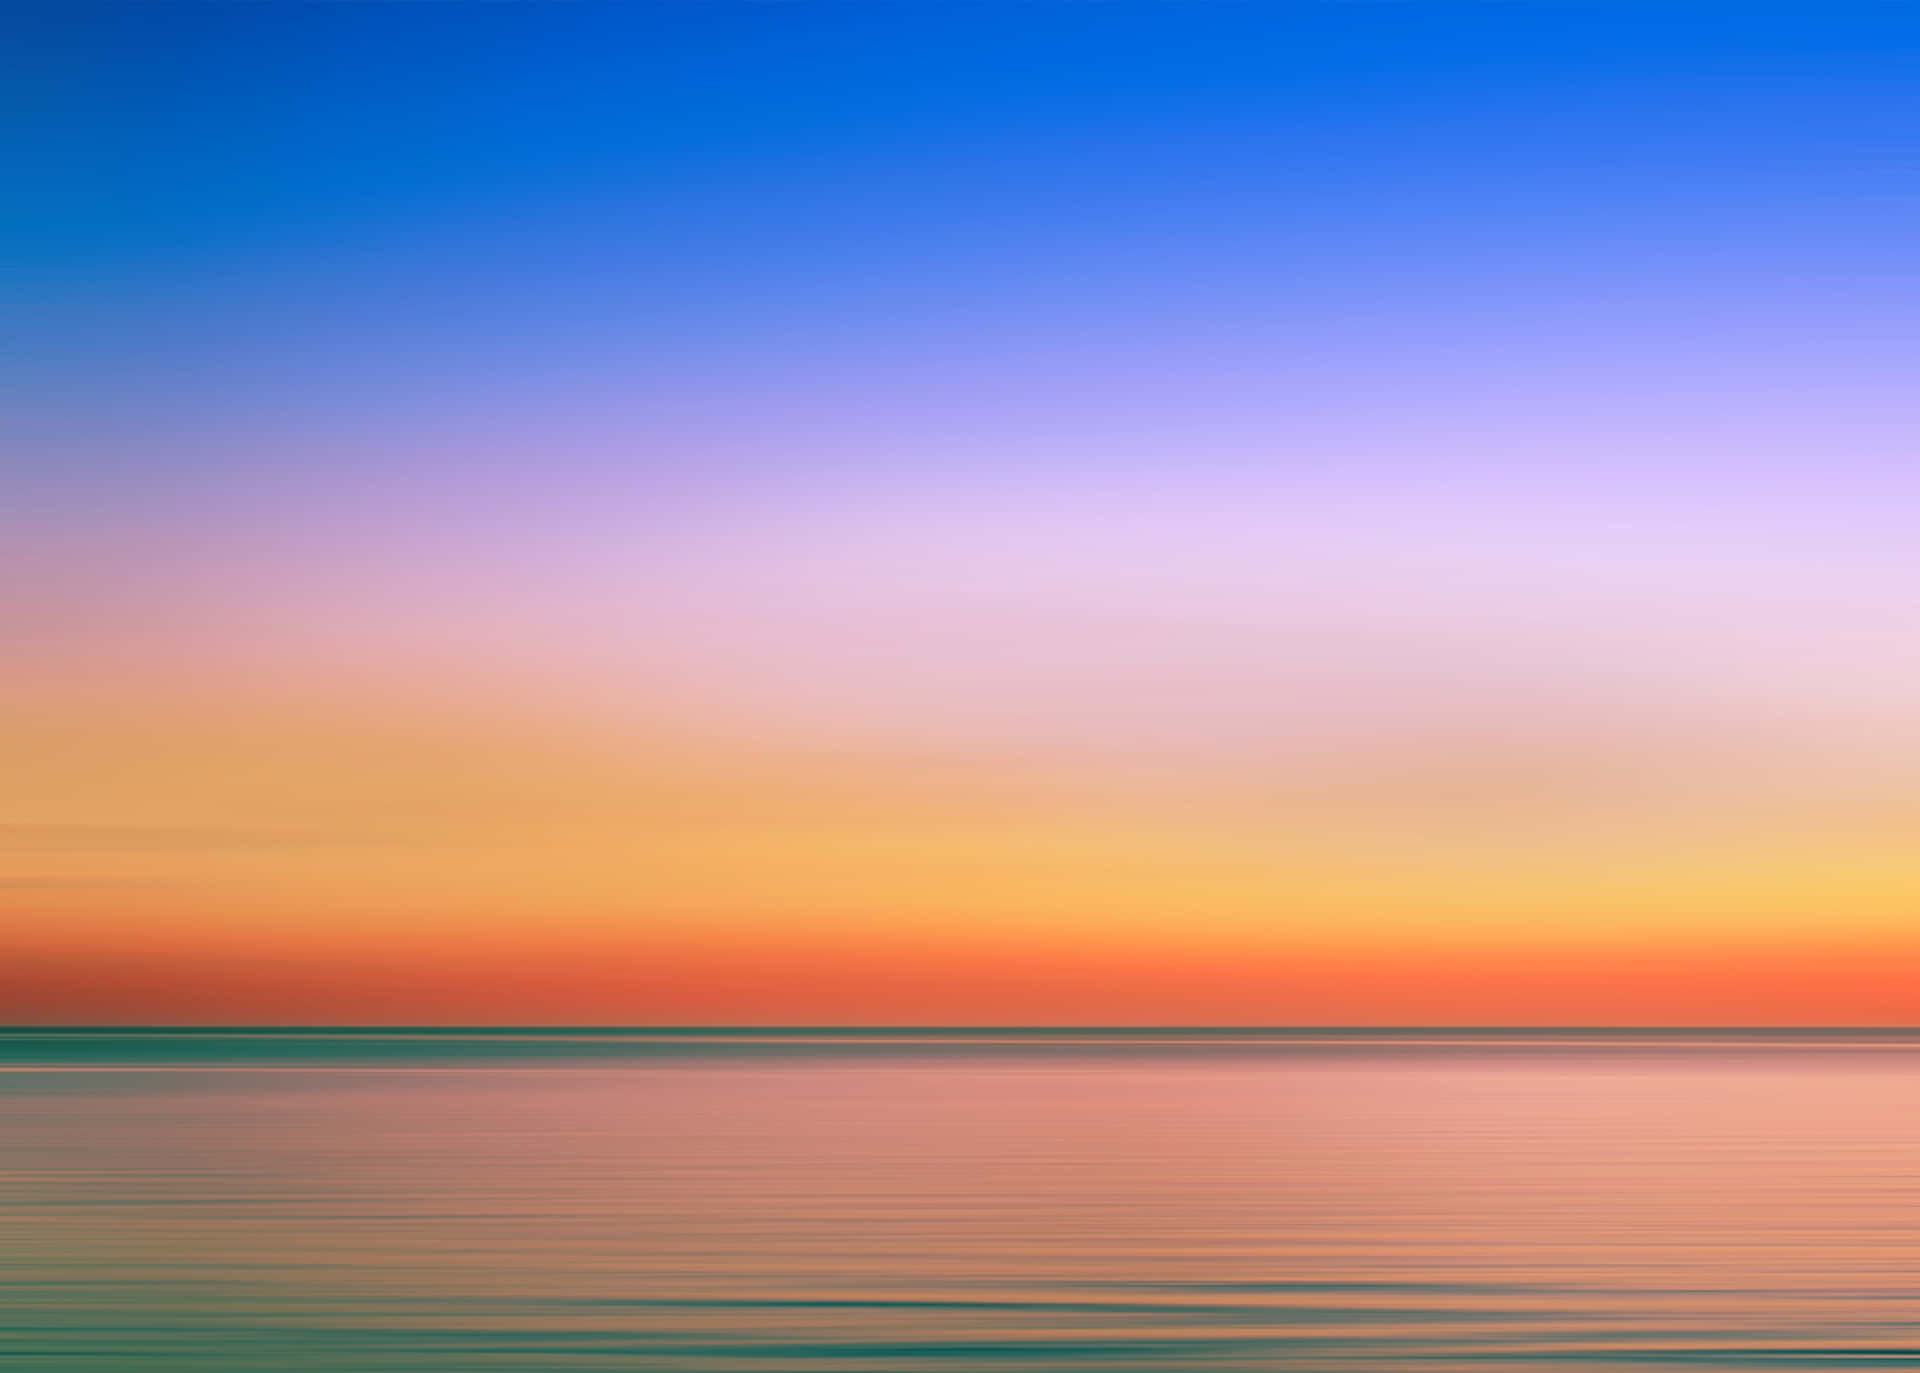 A Sunset Over The Ocean With A Colorful Sky Wallpaper